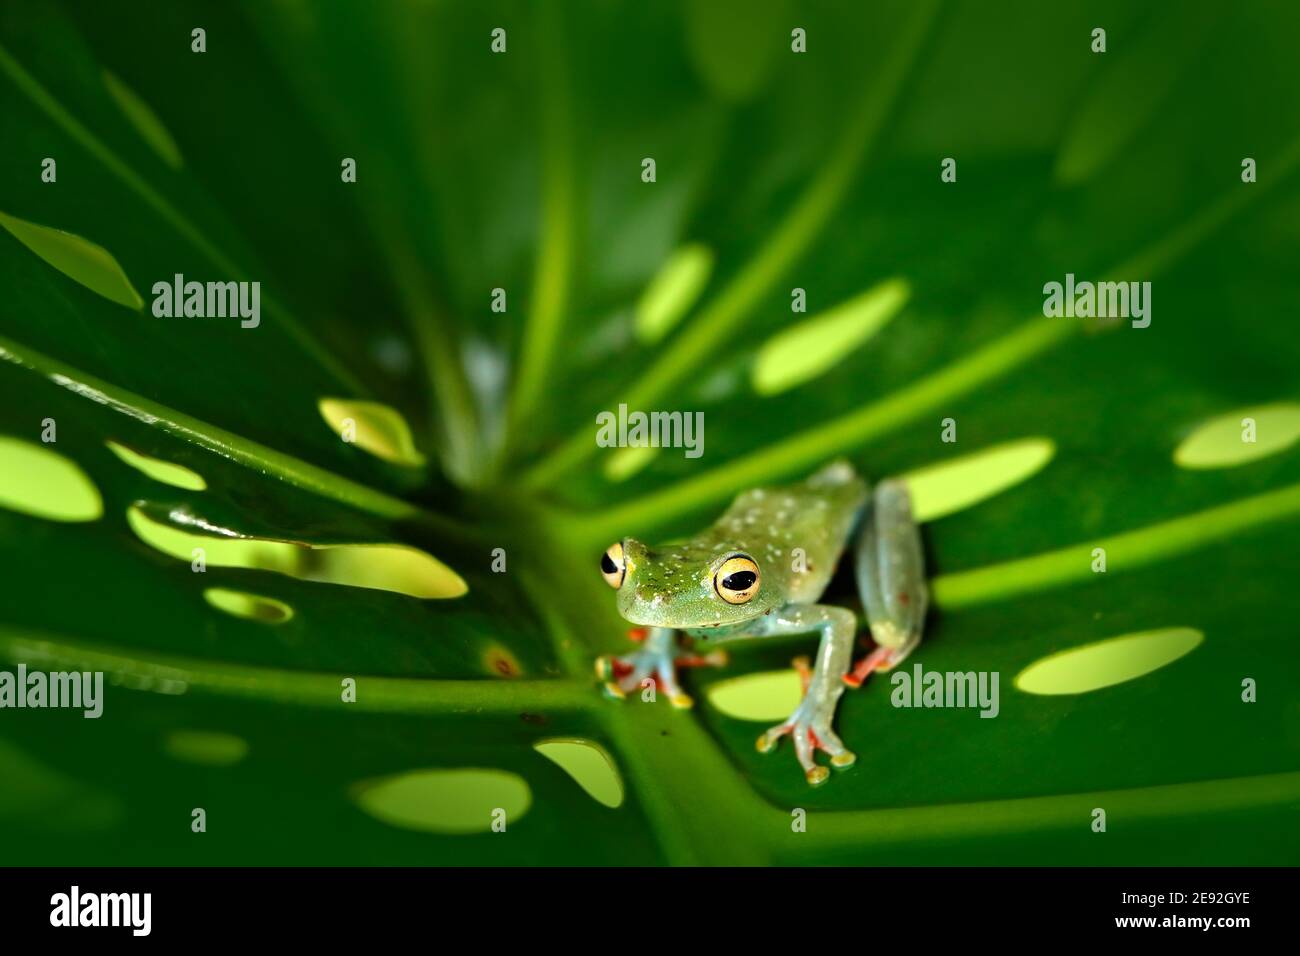 Tropical nature in forest. Olive Tree Frog, Scinax elaeochroa, sitting on big green leaf. Frog with big eye. Night behavior in Costa Rica. Stock Photo